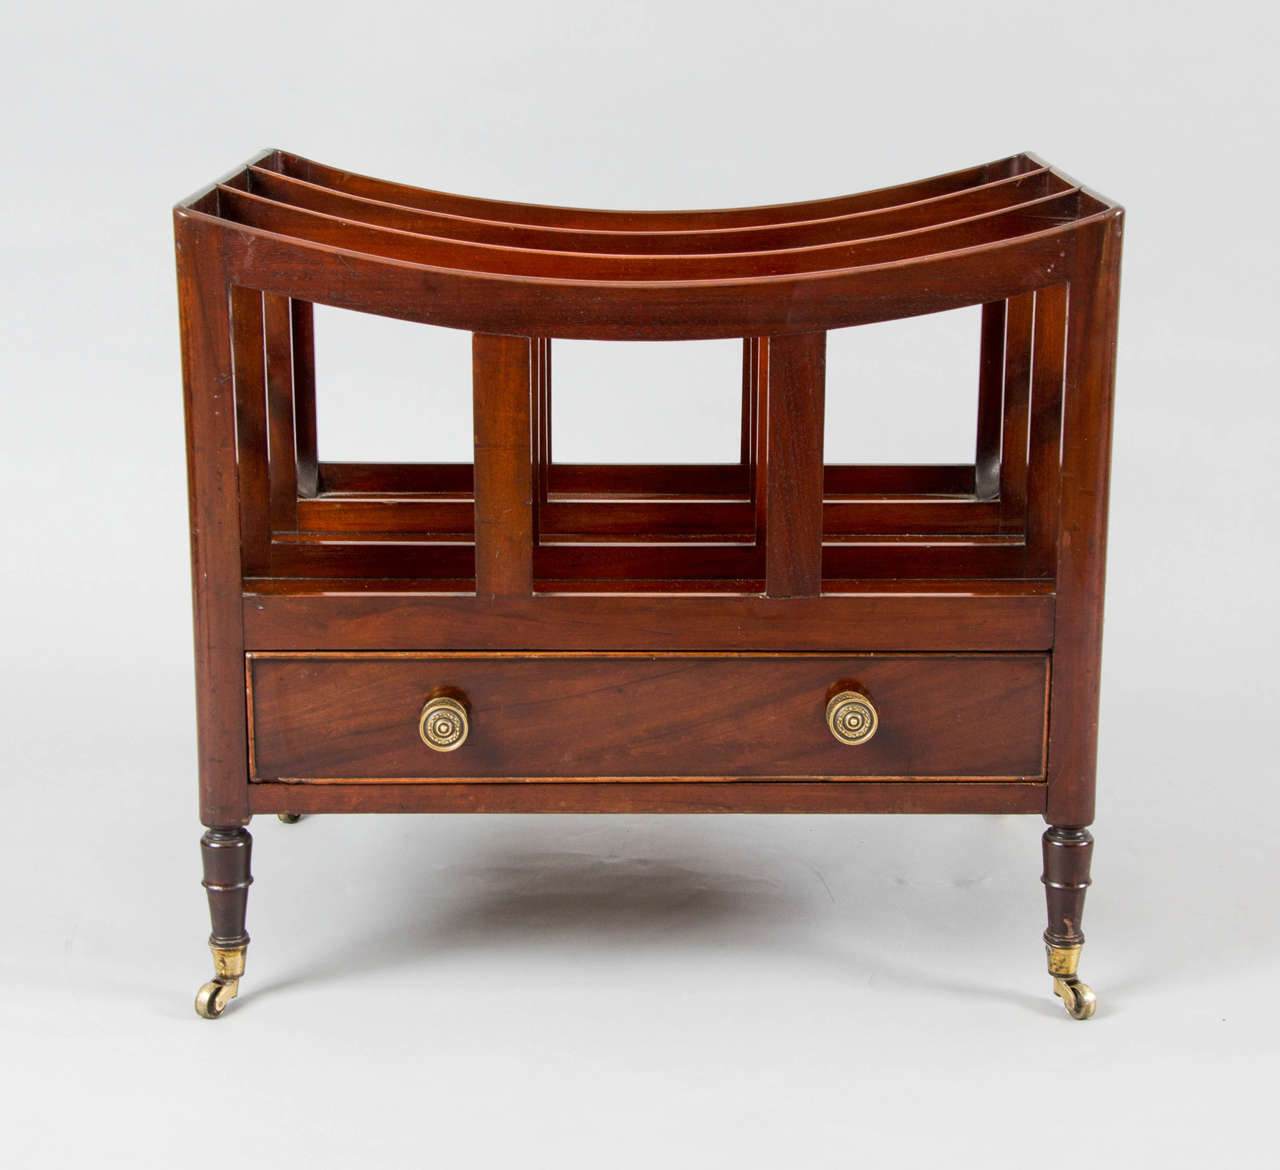 A good, late George III mahogany canterbury with replaced brass handles